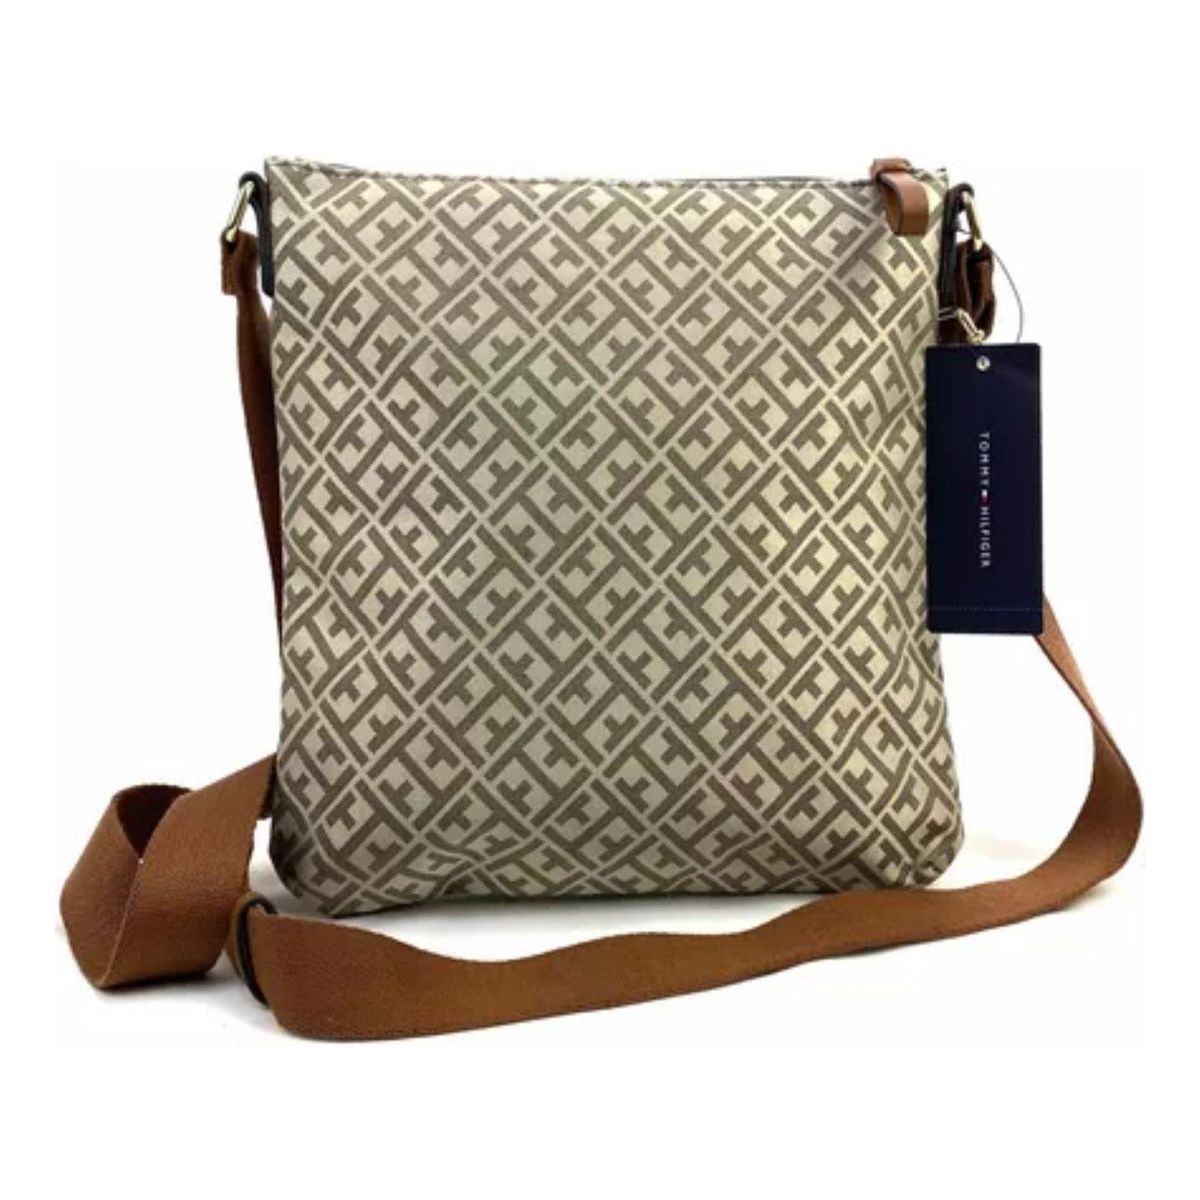 Tommy Hilfiger Crossbody with Pouch